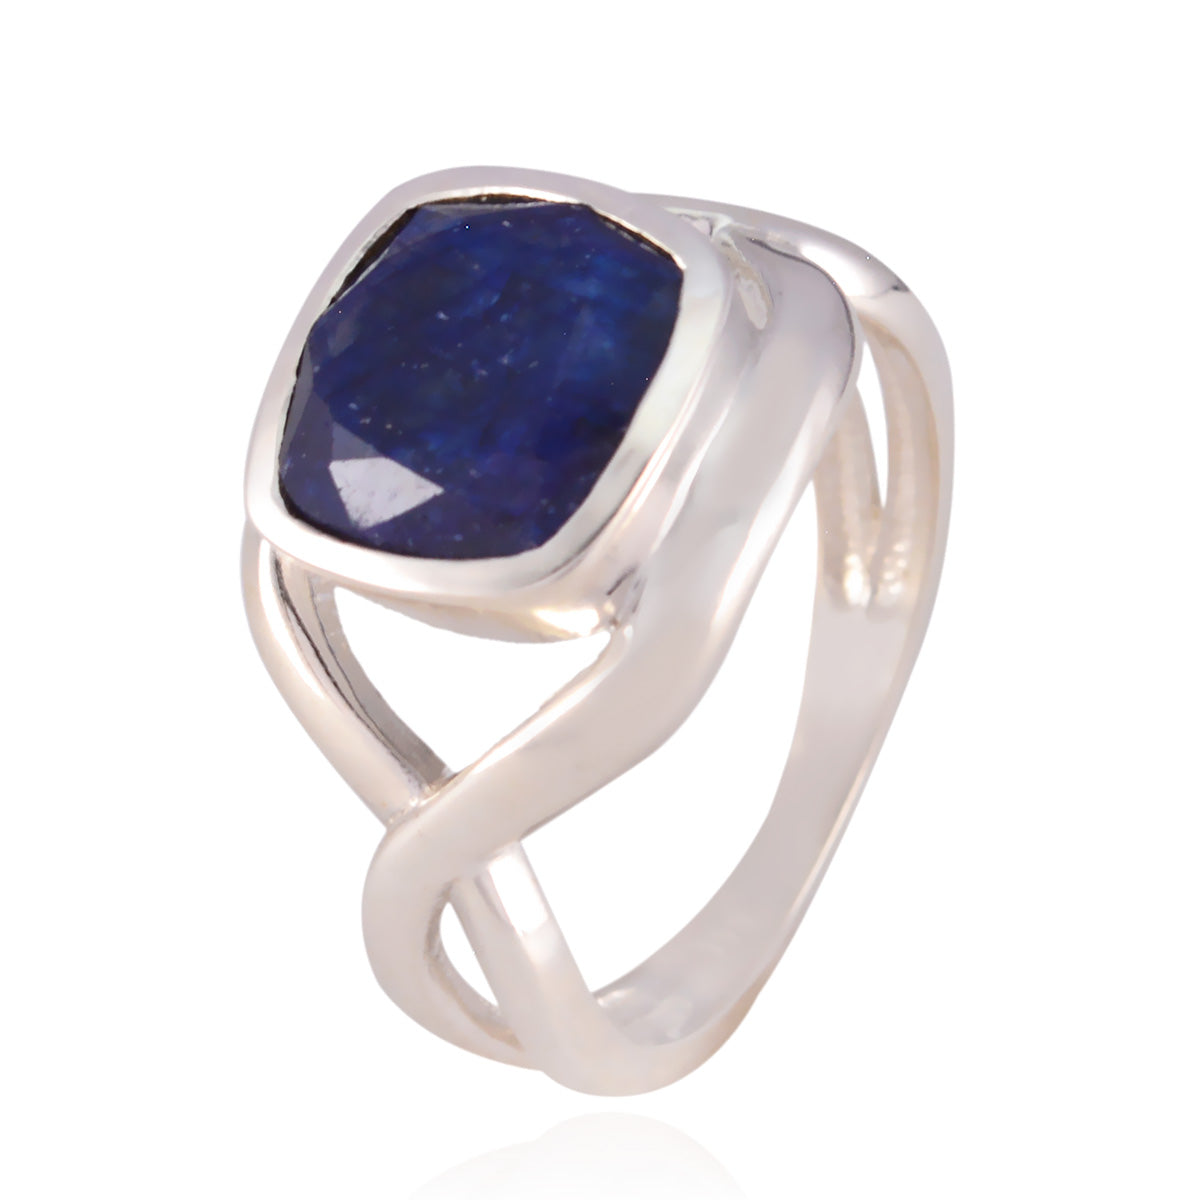 Teasing Gemstones Indiansapphire Solid Silver Ring Jewelry Trends